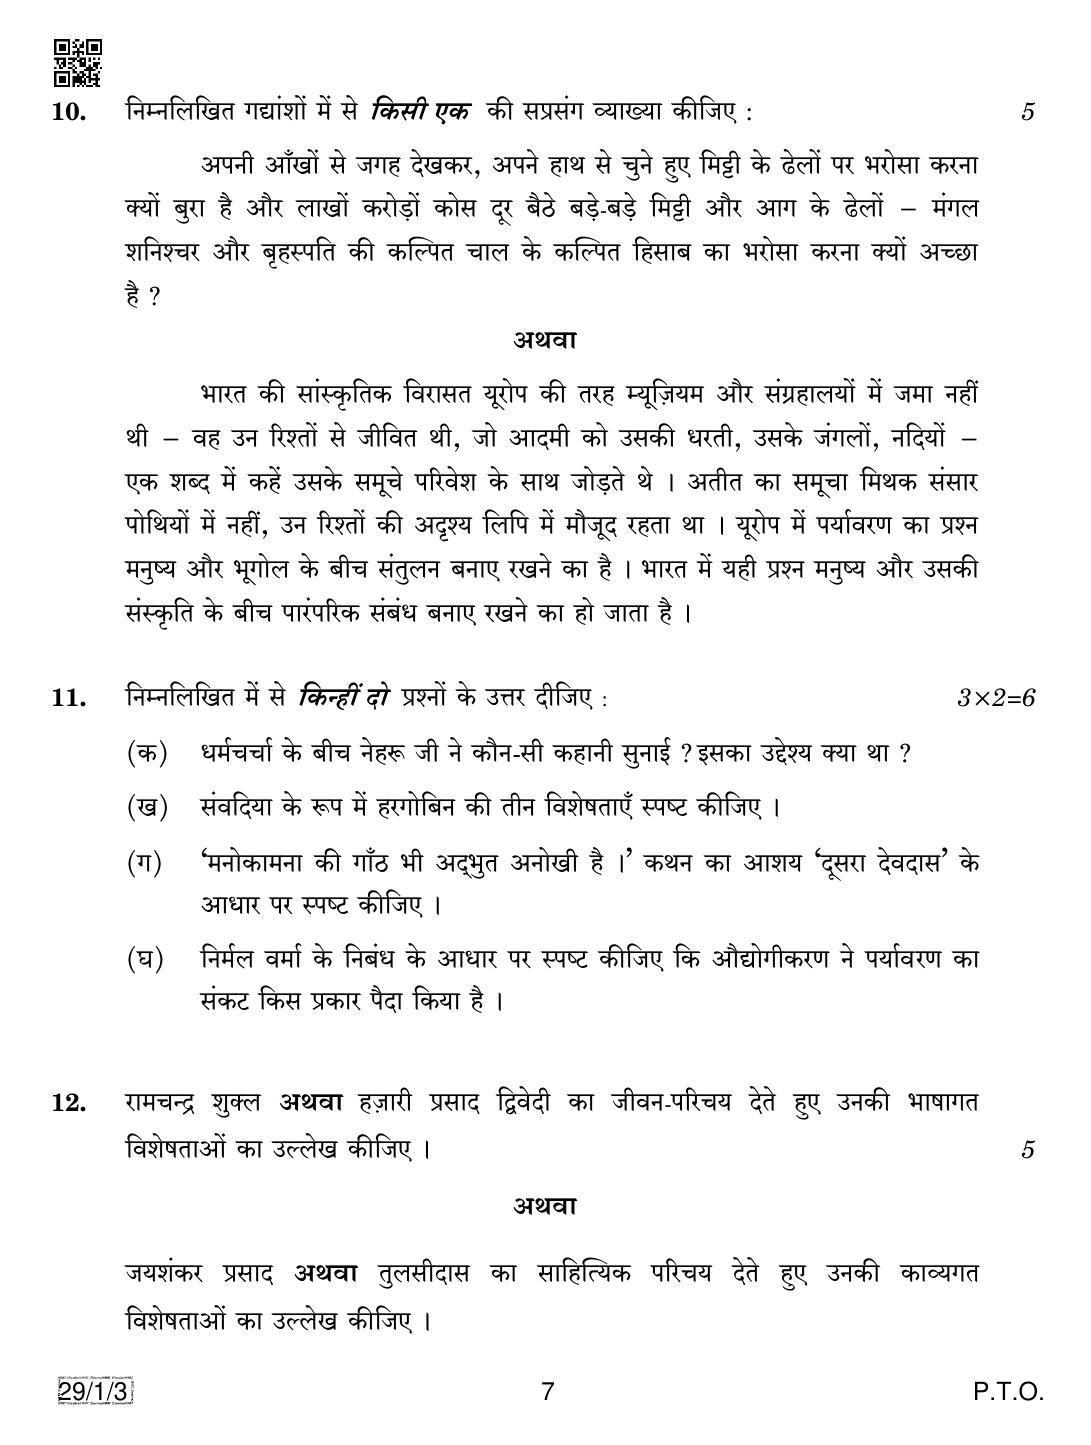 CBSE Class 12 29-1-3 HINDI ELECTIVE 2019 Compartment Question Paper - Page 7